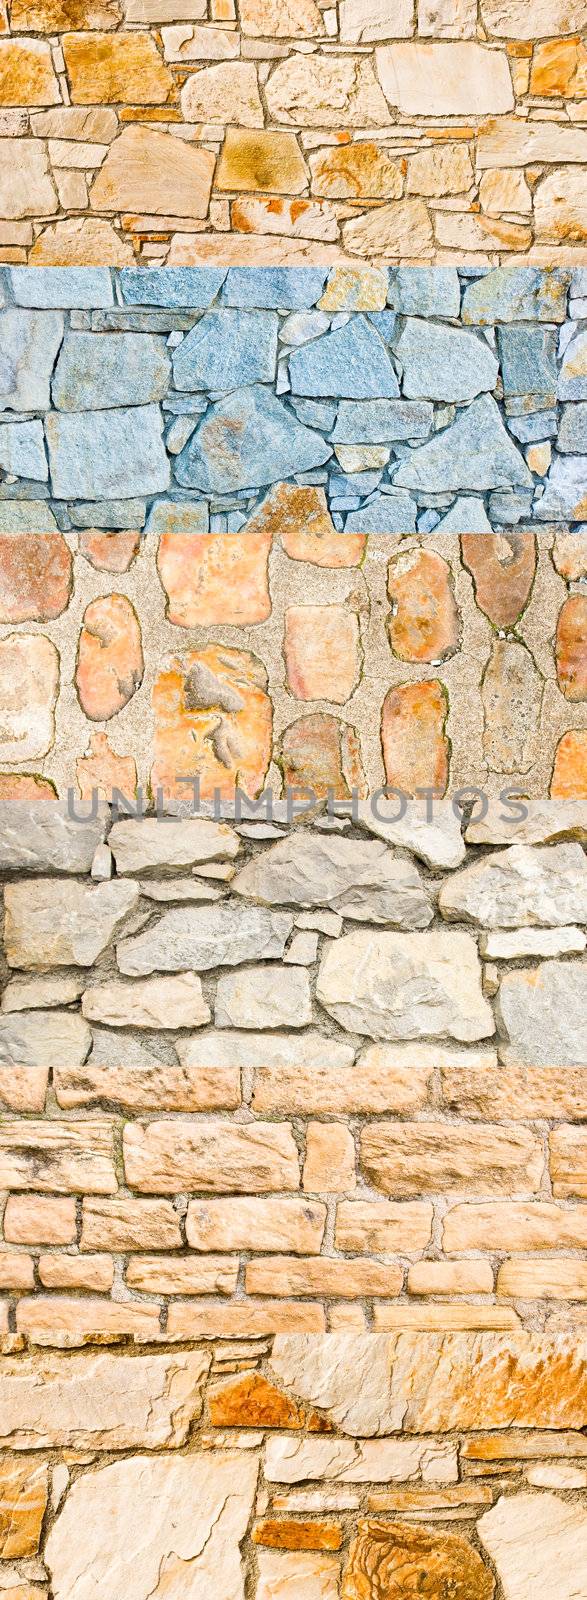 Set of stone tile wall patterns